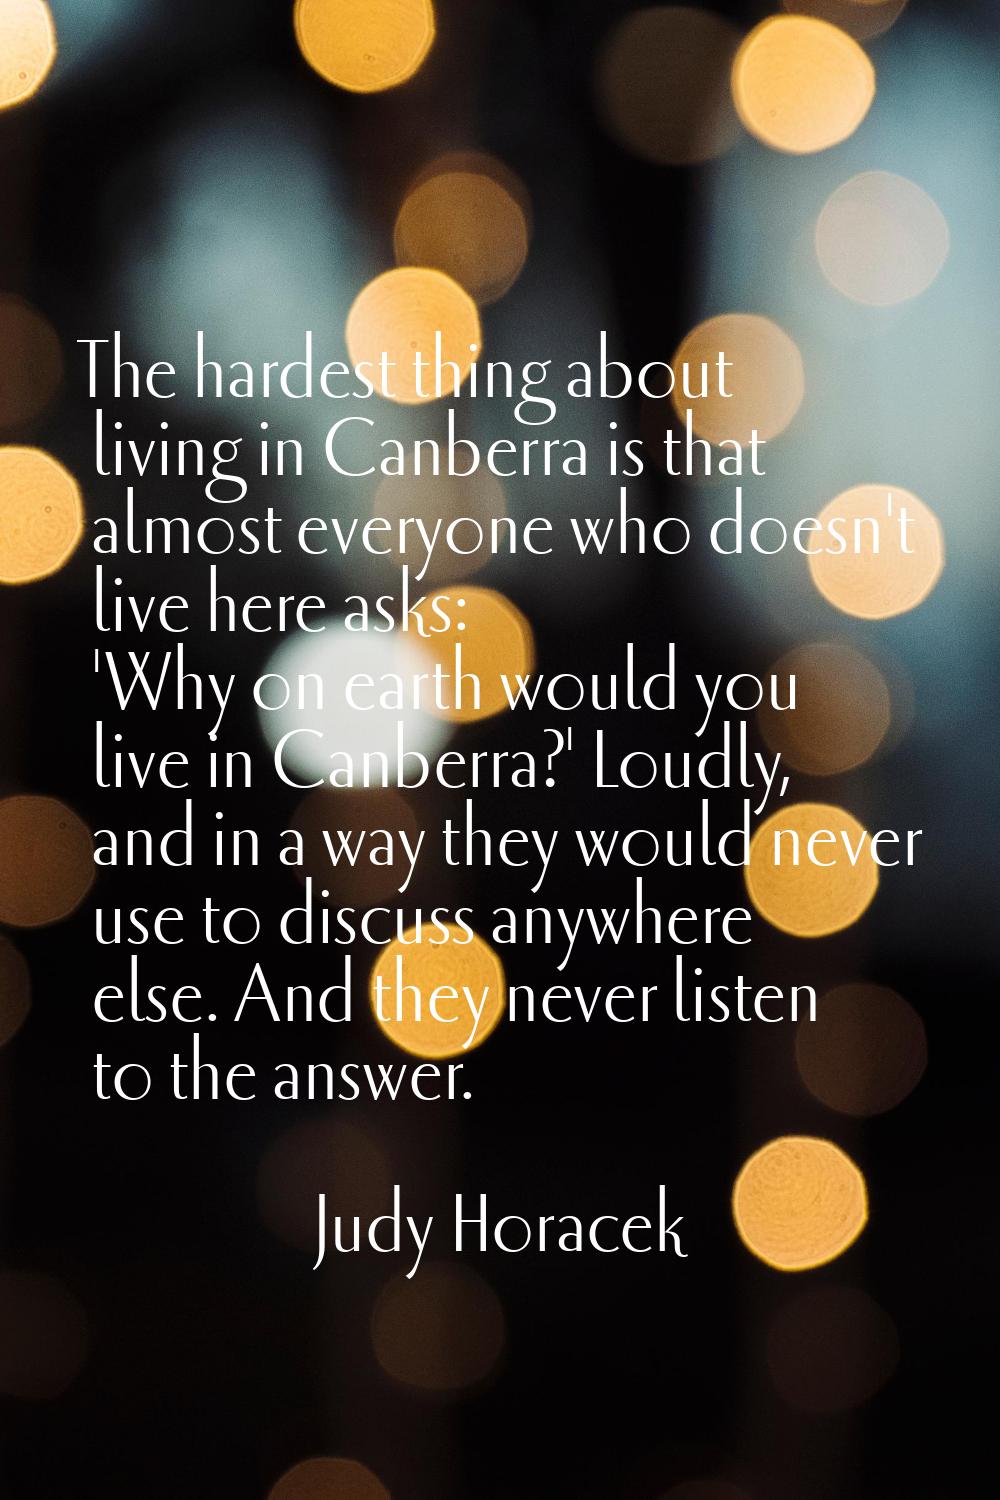 The hardest thing about living in Canberra is that almost everyone who doesn't live here asks: 'Why